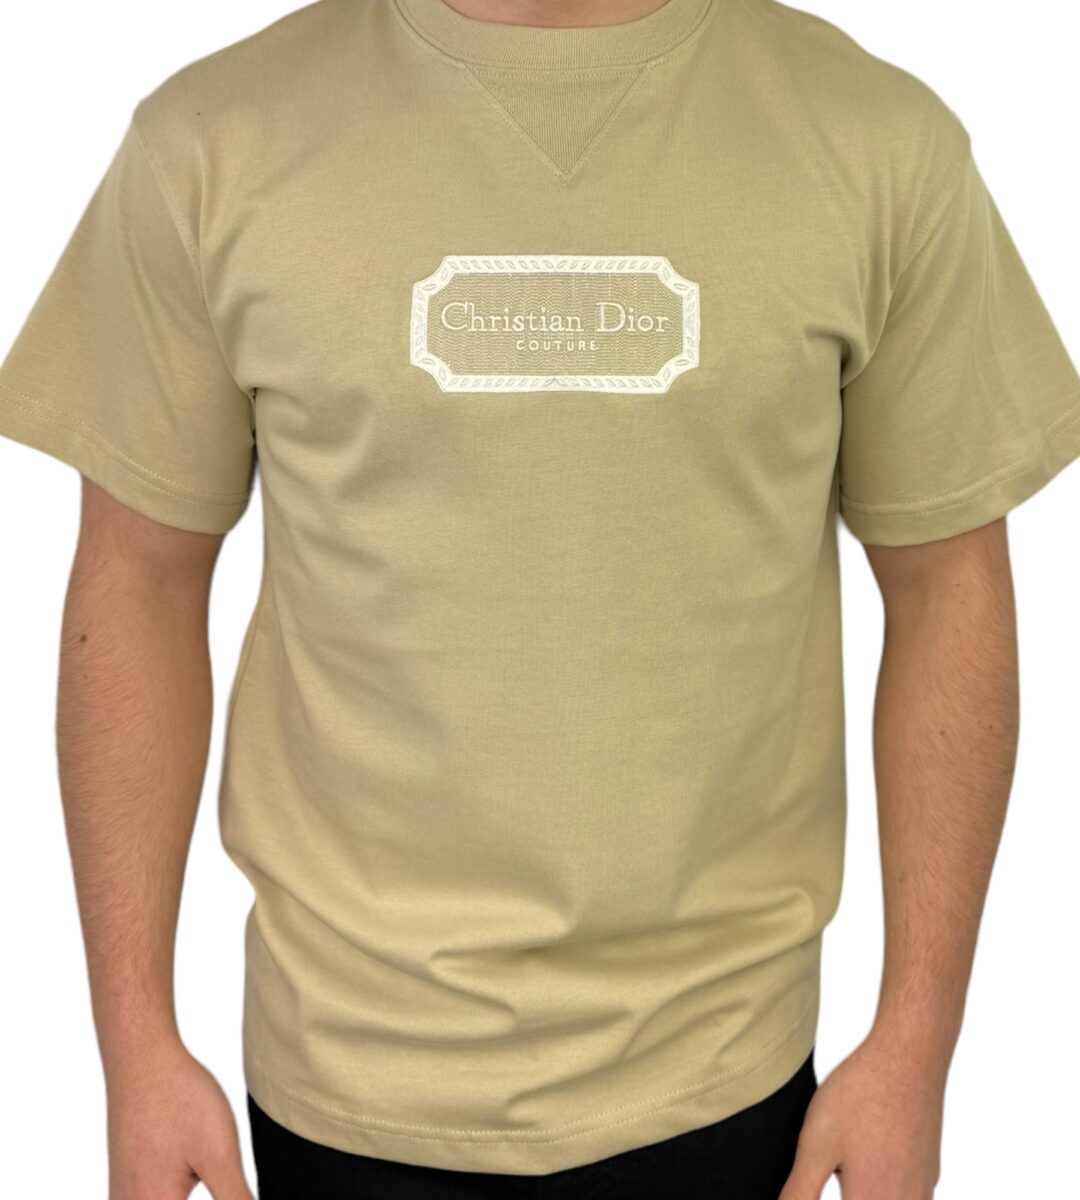 Christian Dior Couture T-Shirt Beige